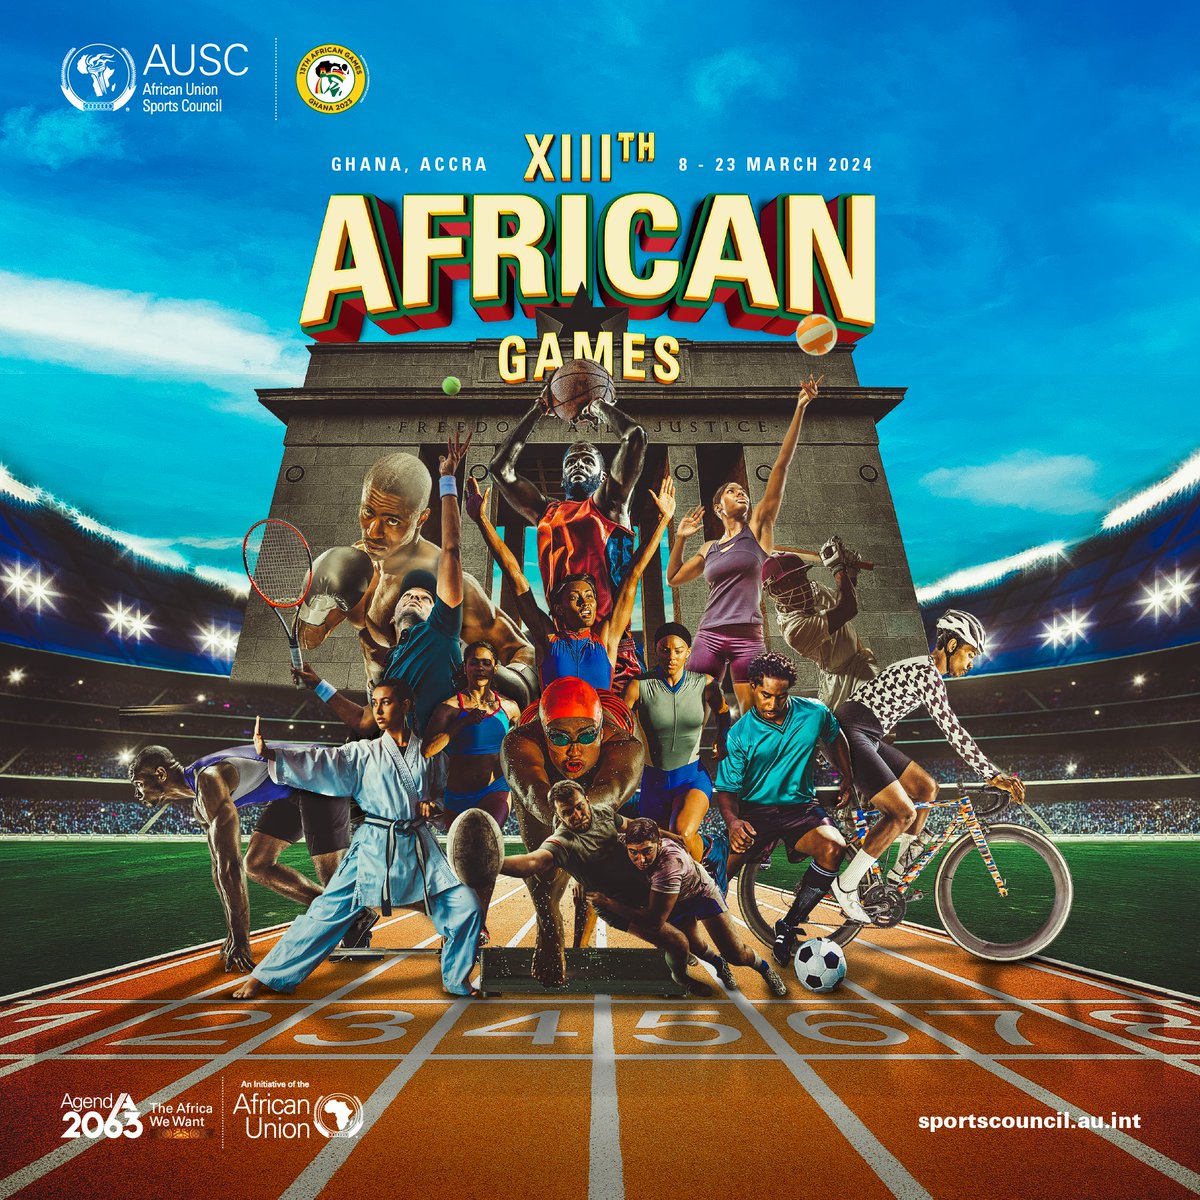 The 13th #AfricanGames are here! Get ready for the 13th African Games opening ceremony! Celebrate 'Experience the African Dream' with us at the University of Ghana Sports Stadium. Witness special performances by Shatta Wale, Pat Thomas, Ebo Taylor, Kamo Mphela, and King…